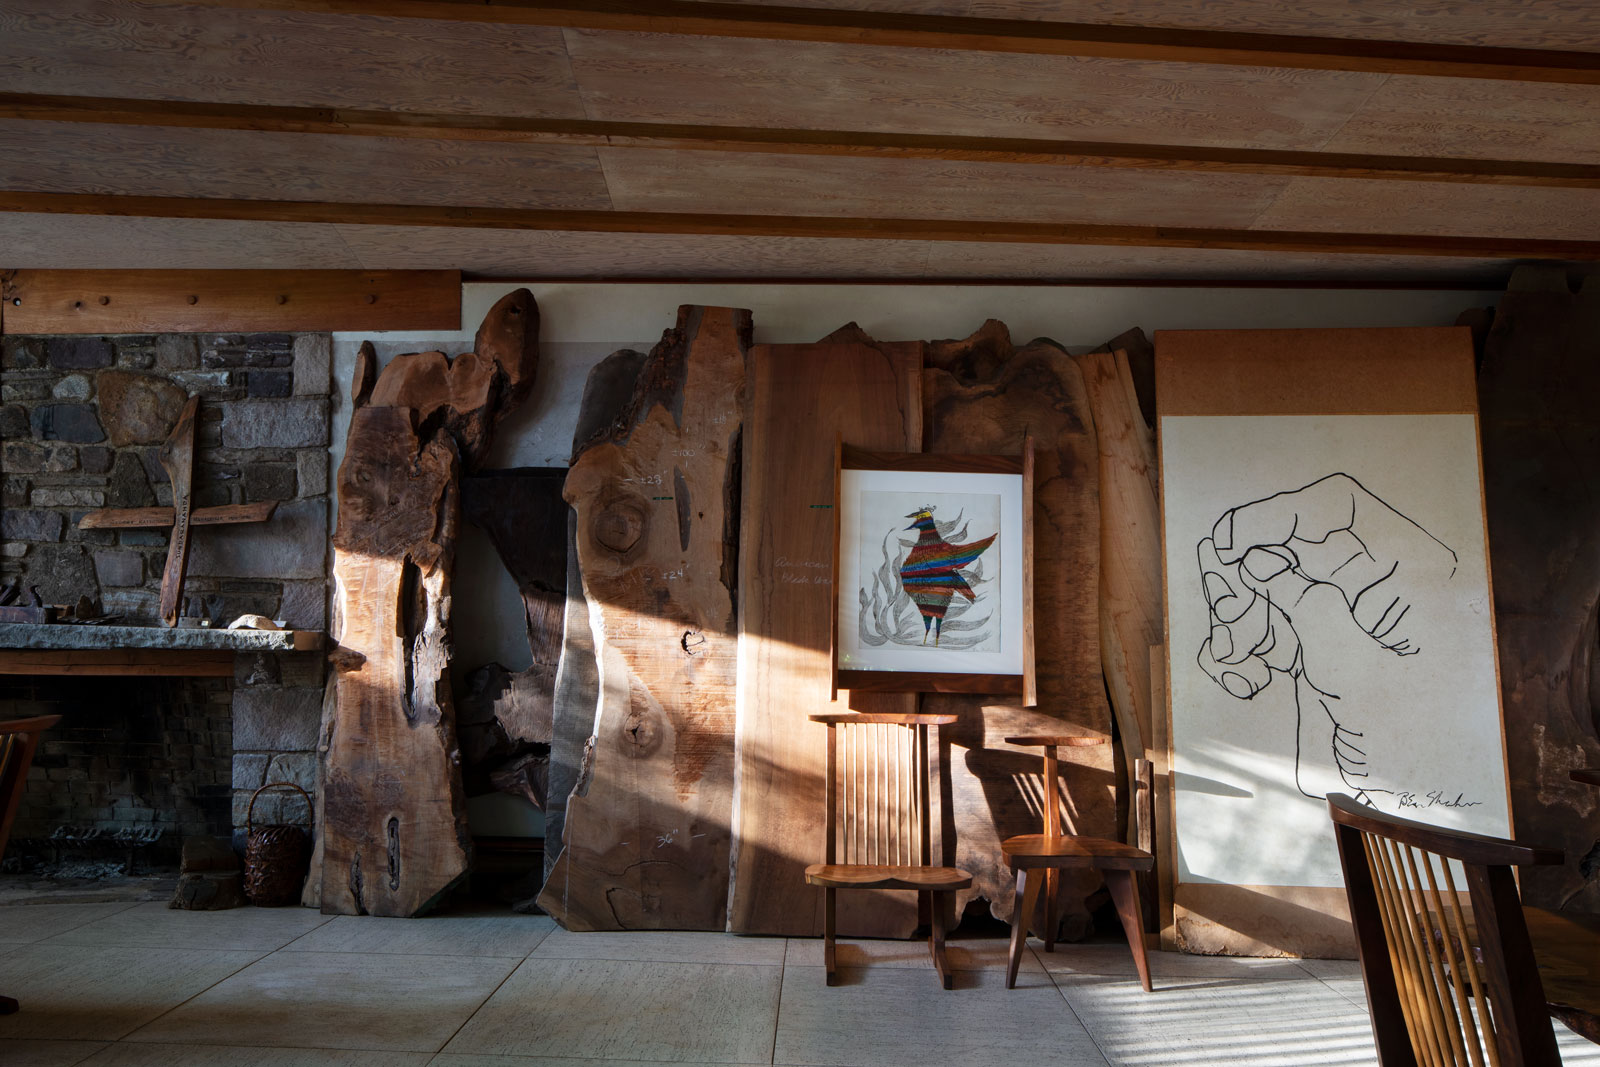 An artist's studio, decked with timber.